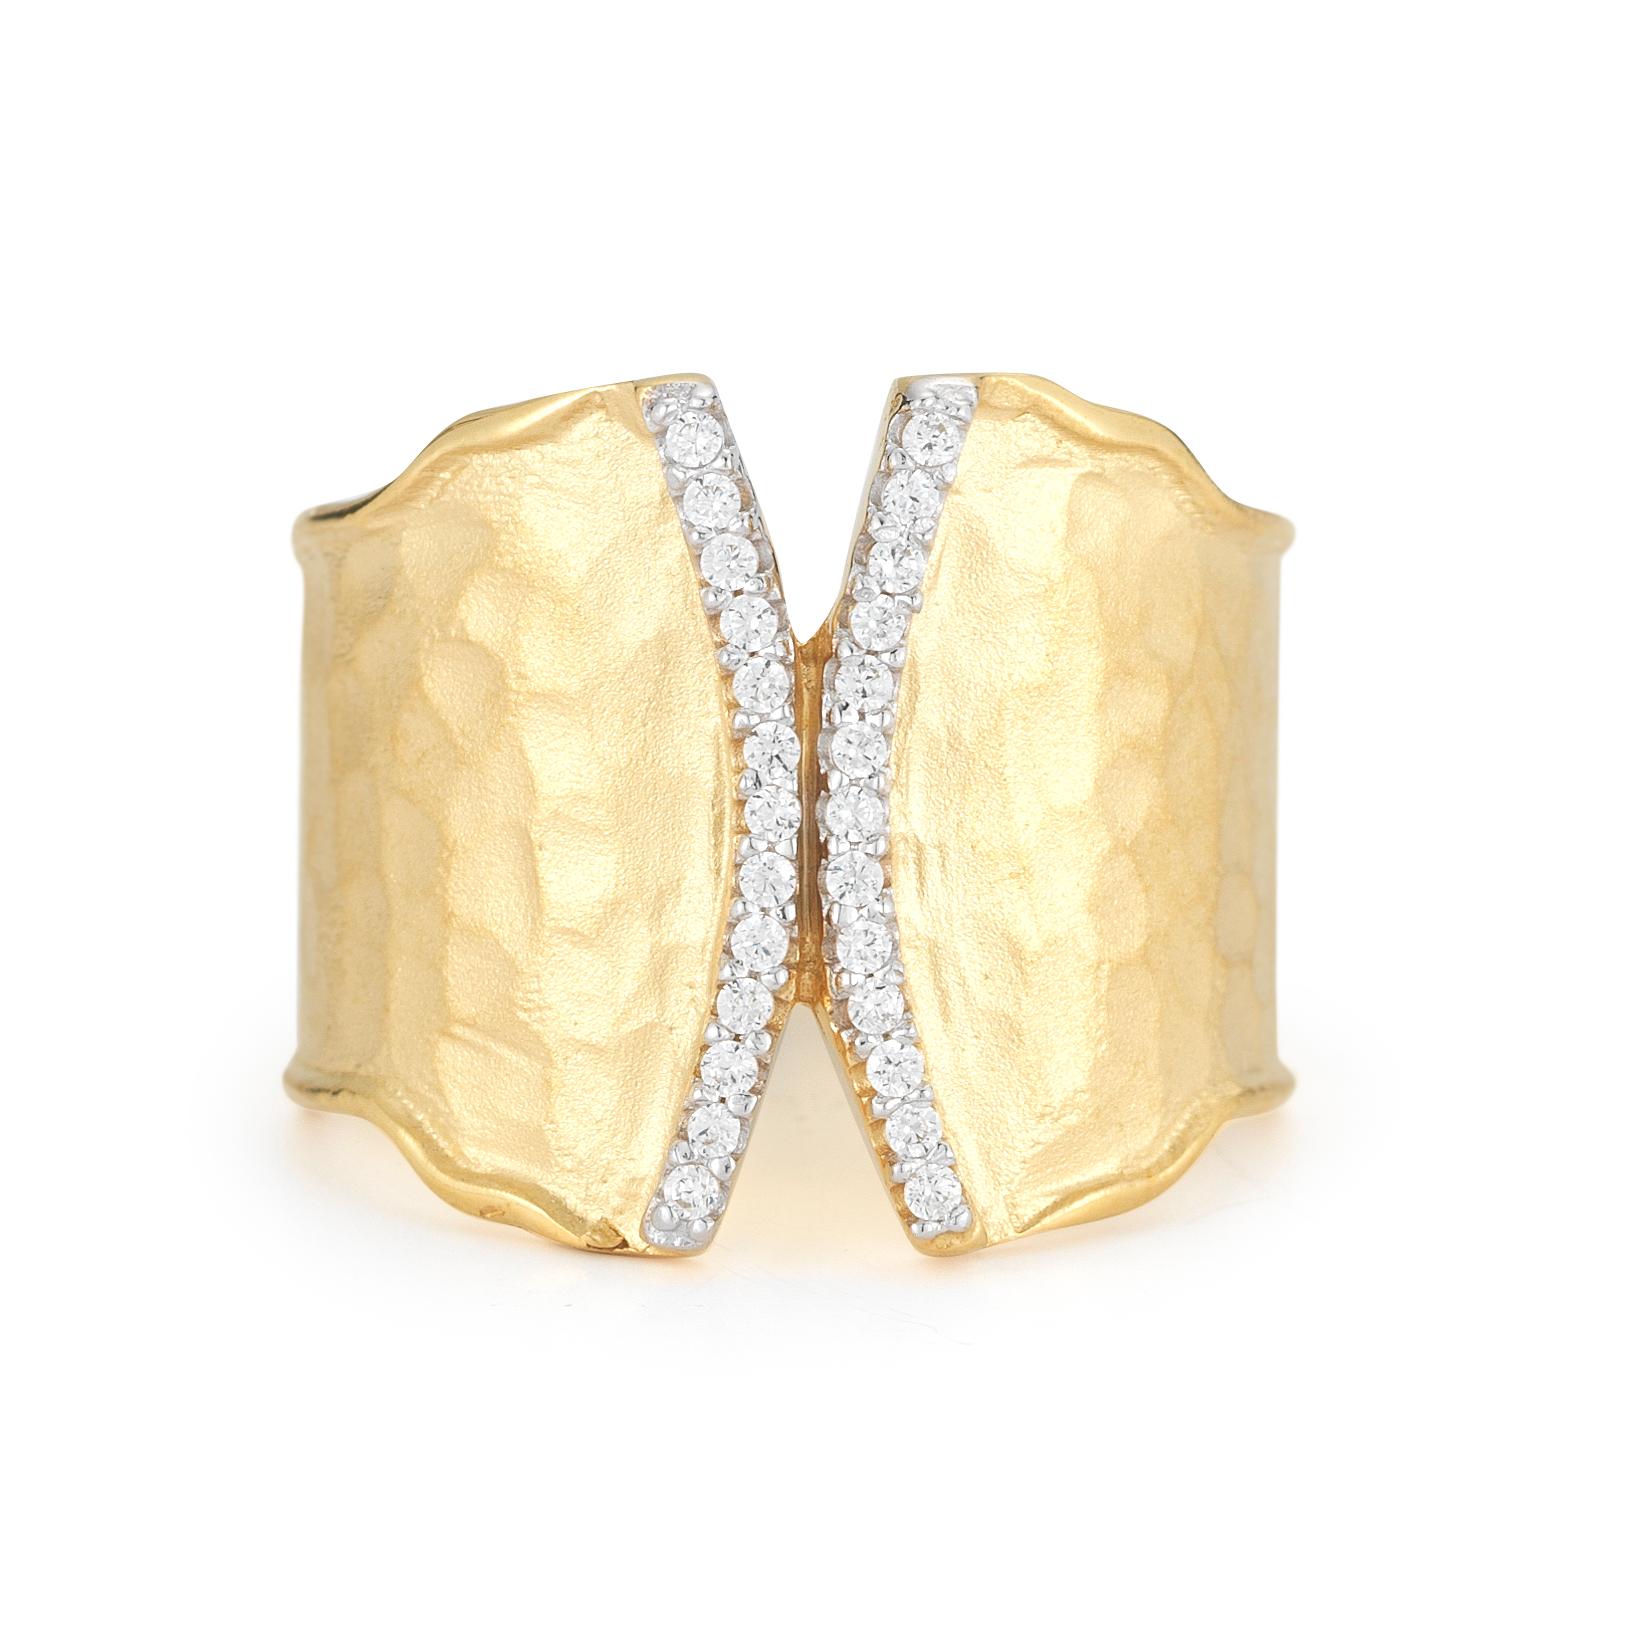 14 Karat Yellow Gold Hand-Crafted Matte and Hammer-Finished Scallop-Edged Ring, Enhanced with 0.18 Carats of Pave Set Diamonds.
